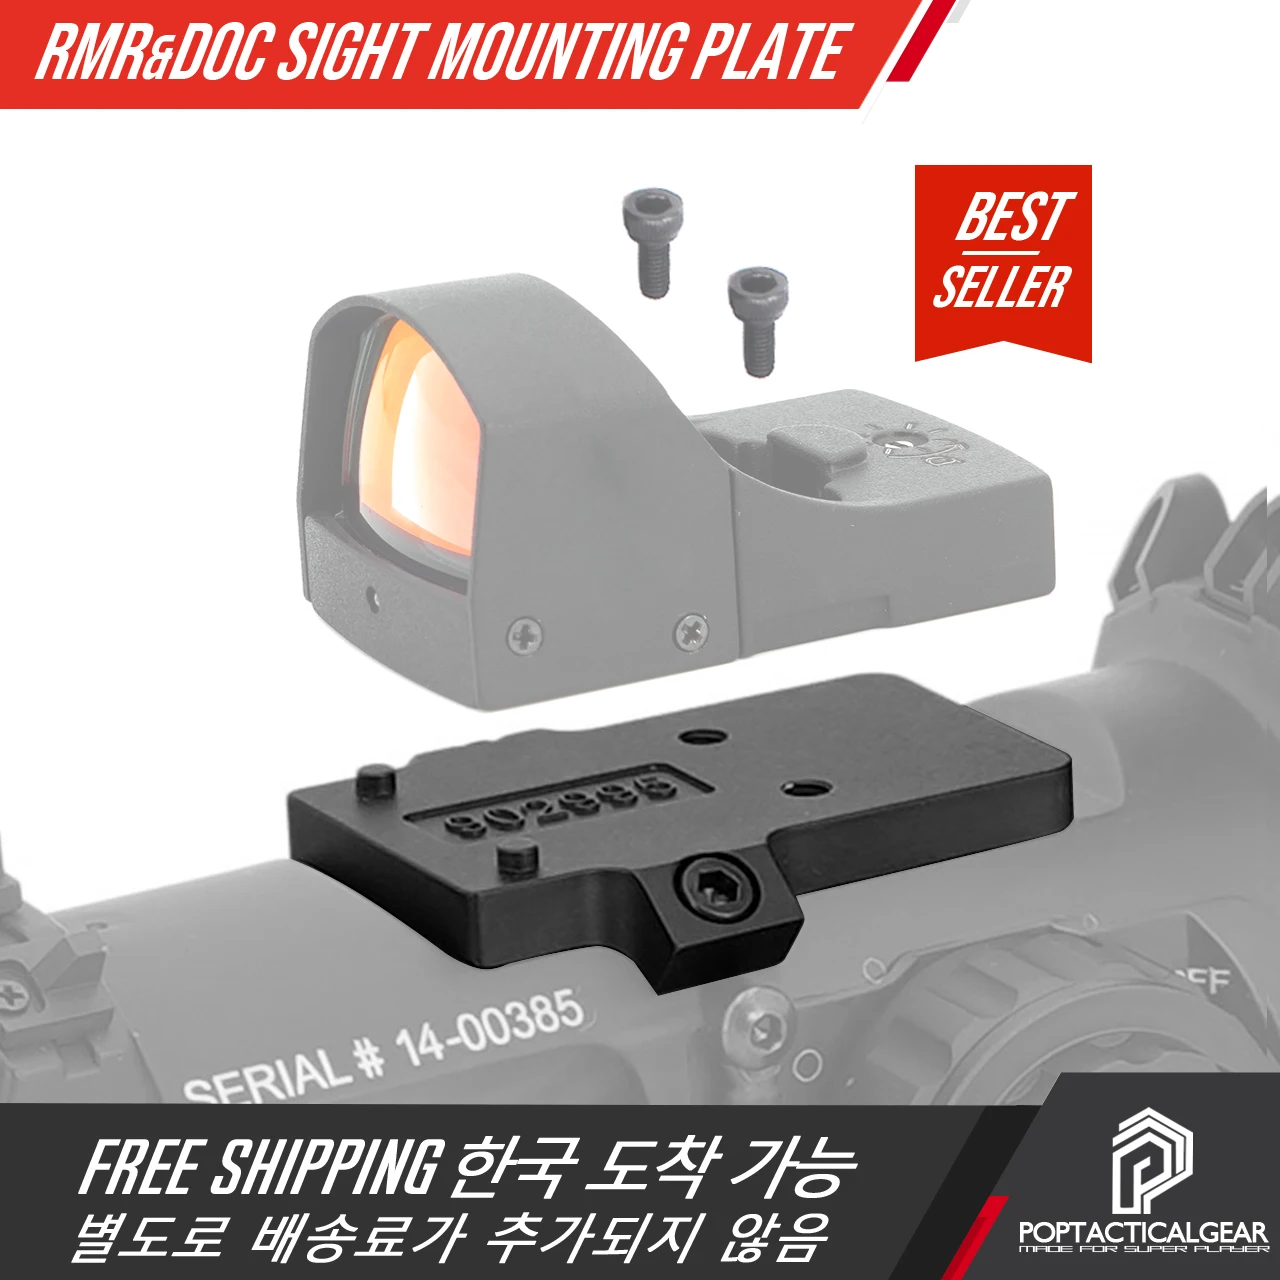 

Elcan DR 1-4x/1.5-6x RMR/Docter red dot sight mounting plate